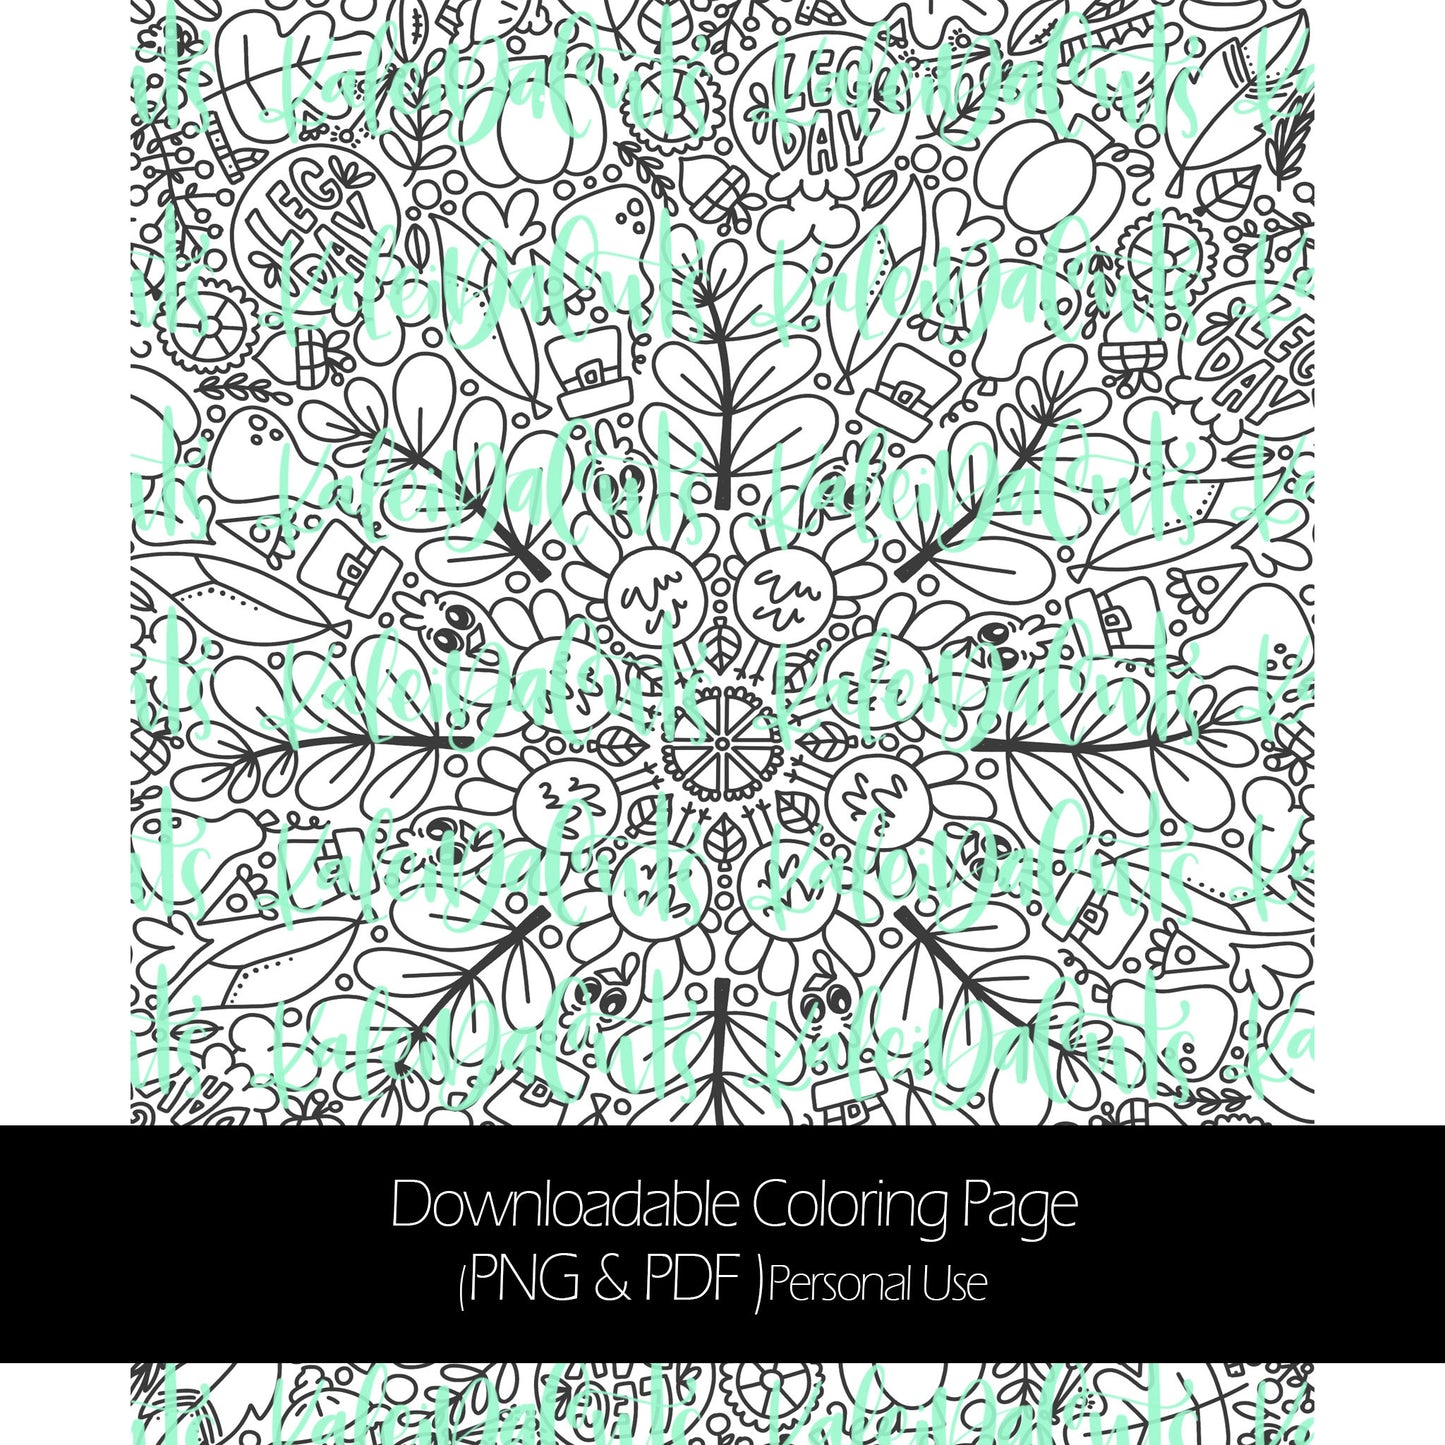 Thanksgiving Downloadable Coloring Page. Personal Use. KaleidaCuts Handlettering.